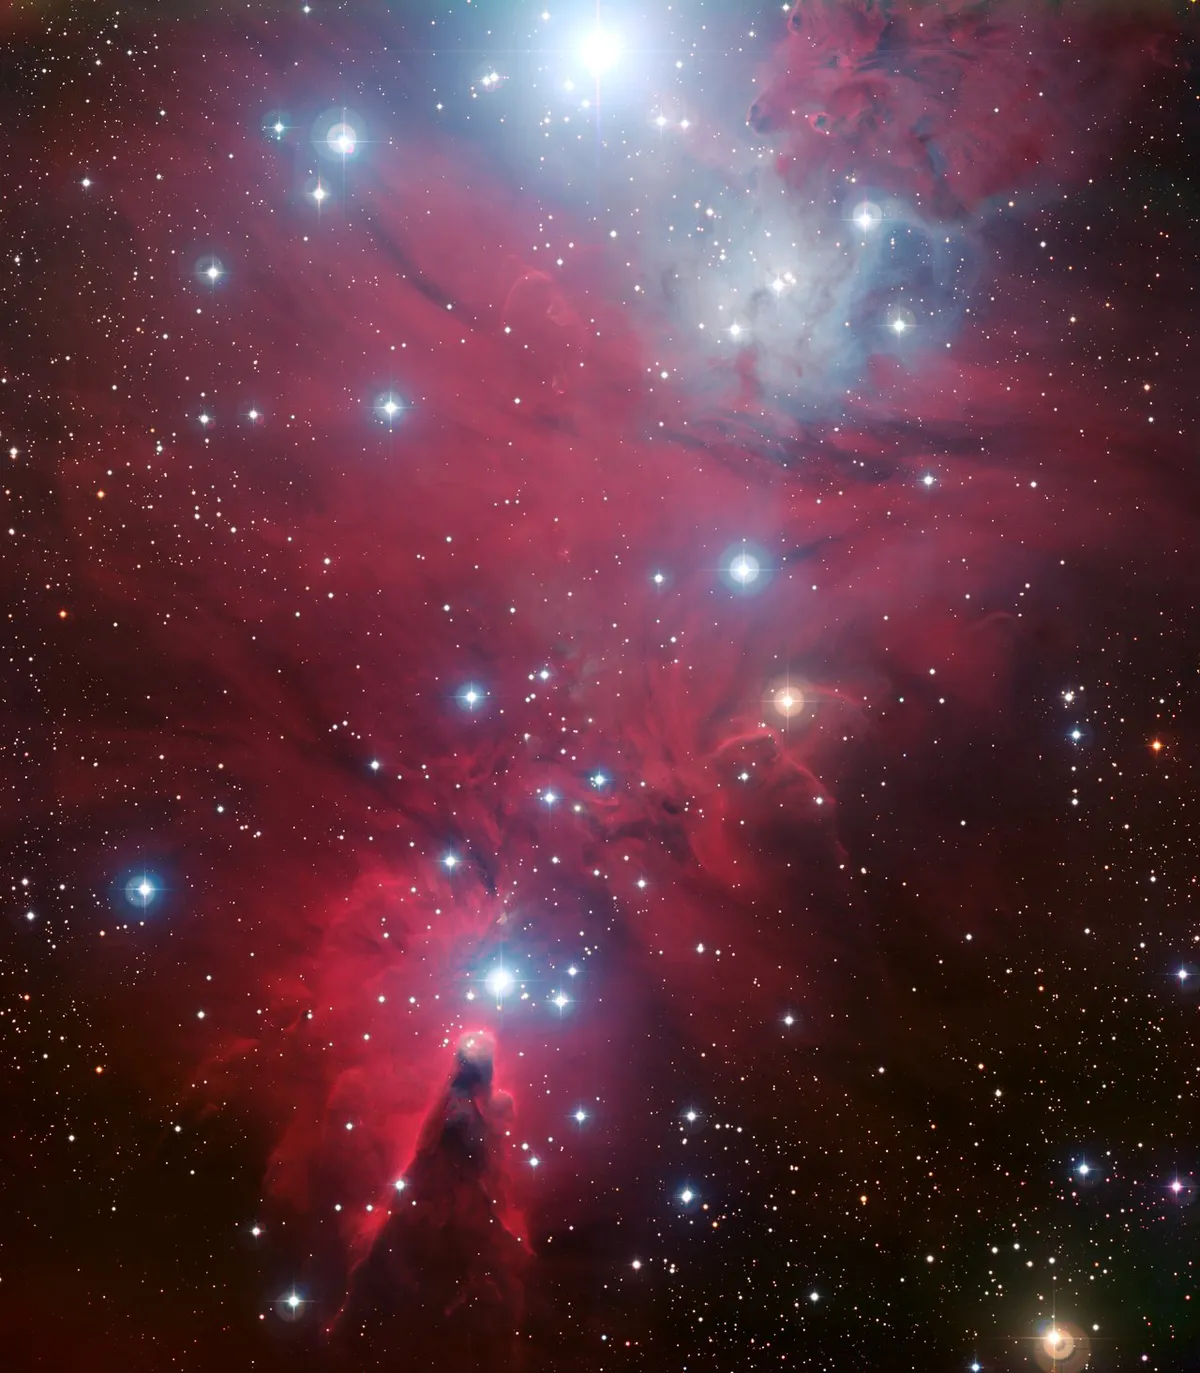 The Christmas Tree Cluster. This image was captured using the Wide Field Imager camera attached to the 2.2-metre Max-Planck Society/ESO telescope at La Silla Observatory, 2,400m high in the Chilean Atacama Desert. Credit: ESO